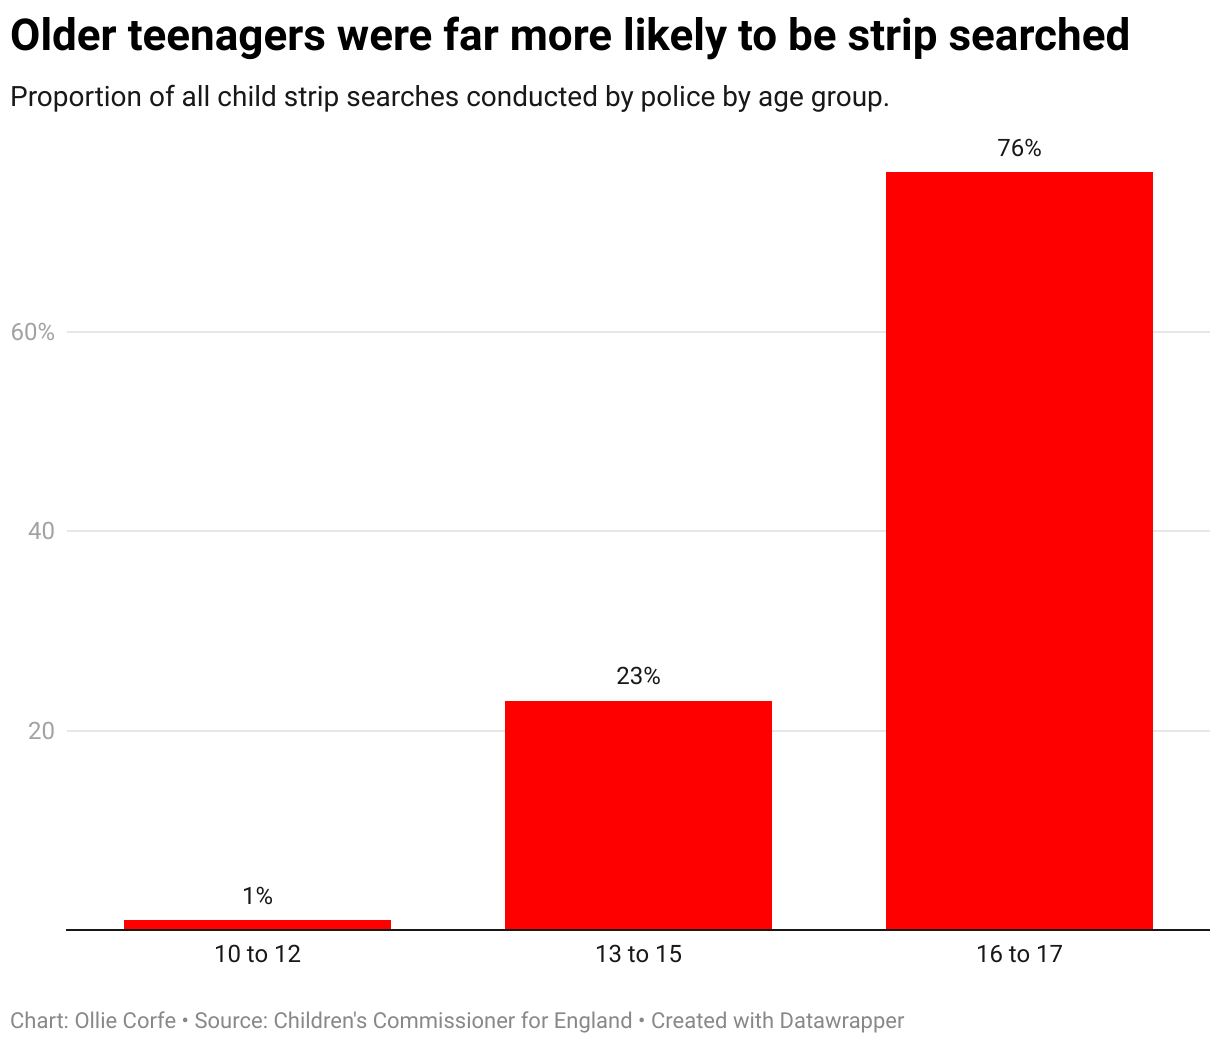 Bar chart showing the proportion of kids strip searched by age.